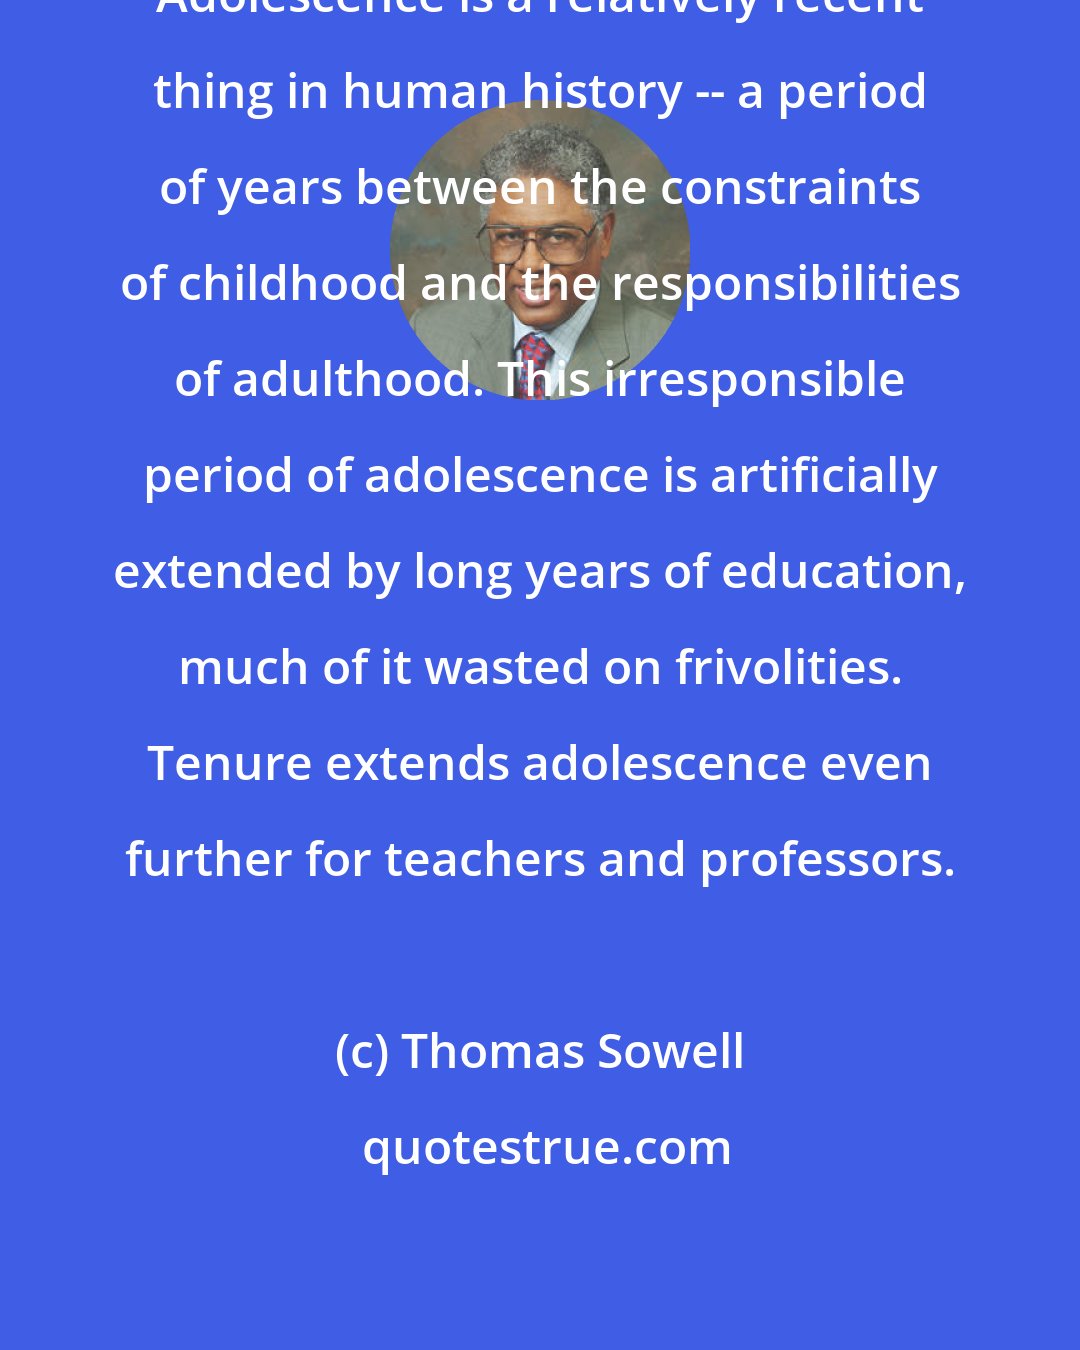 Thomas Sowell: Adolescence is a relatively recent thing in human history -- a period of years between the constraints of childhood and the responsibilities of adulthood. This irresponsible period of adolescence is artificially extended by long years of education, much of it wasted on frivolities. Tenure extends adolescence even further for teachers and professors.